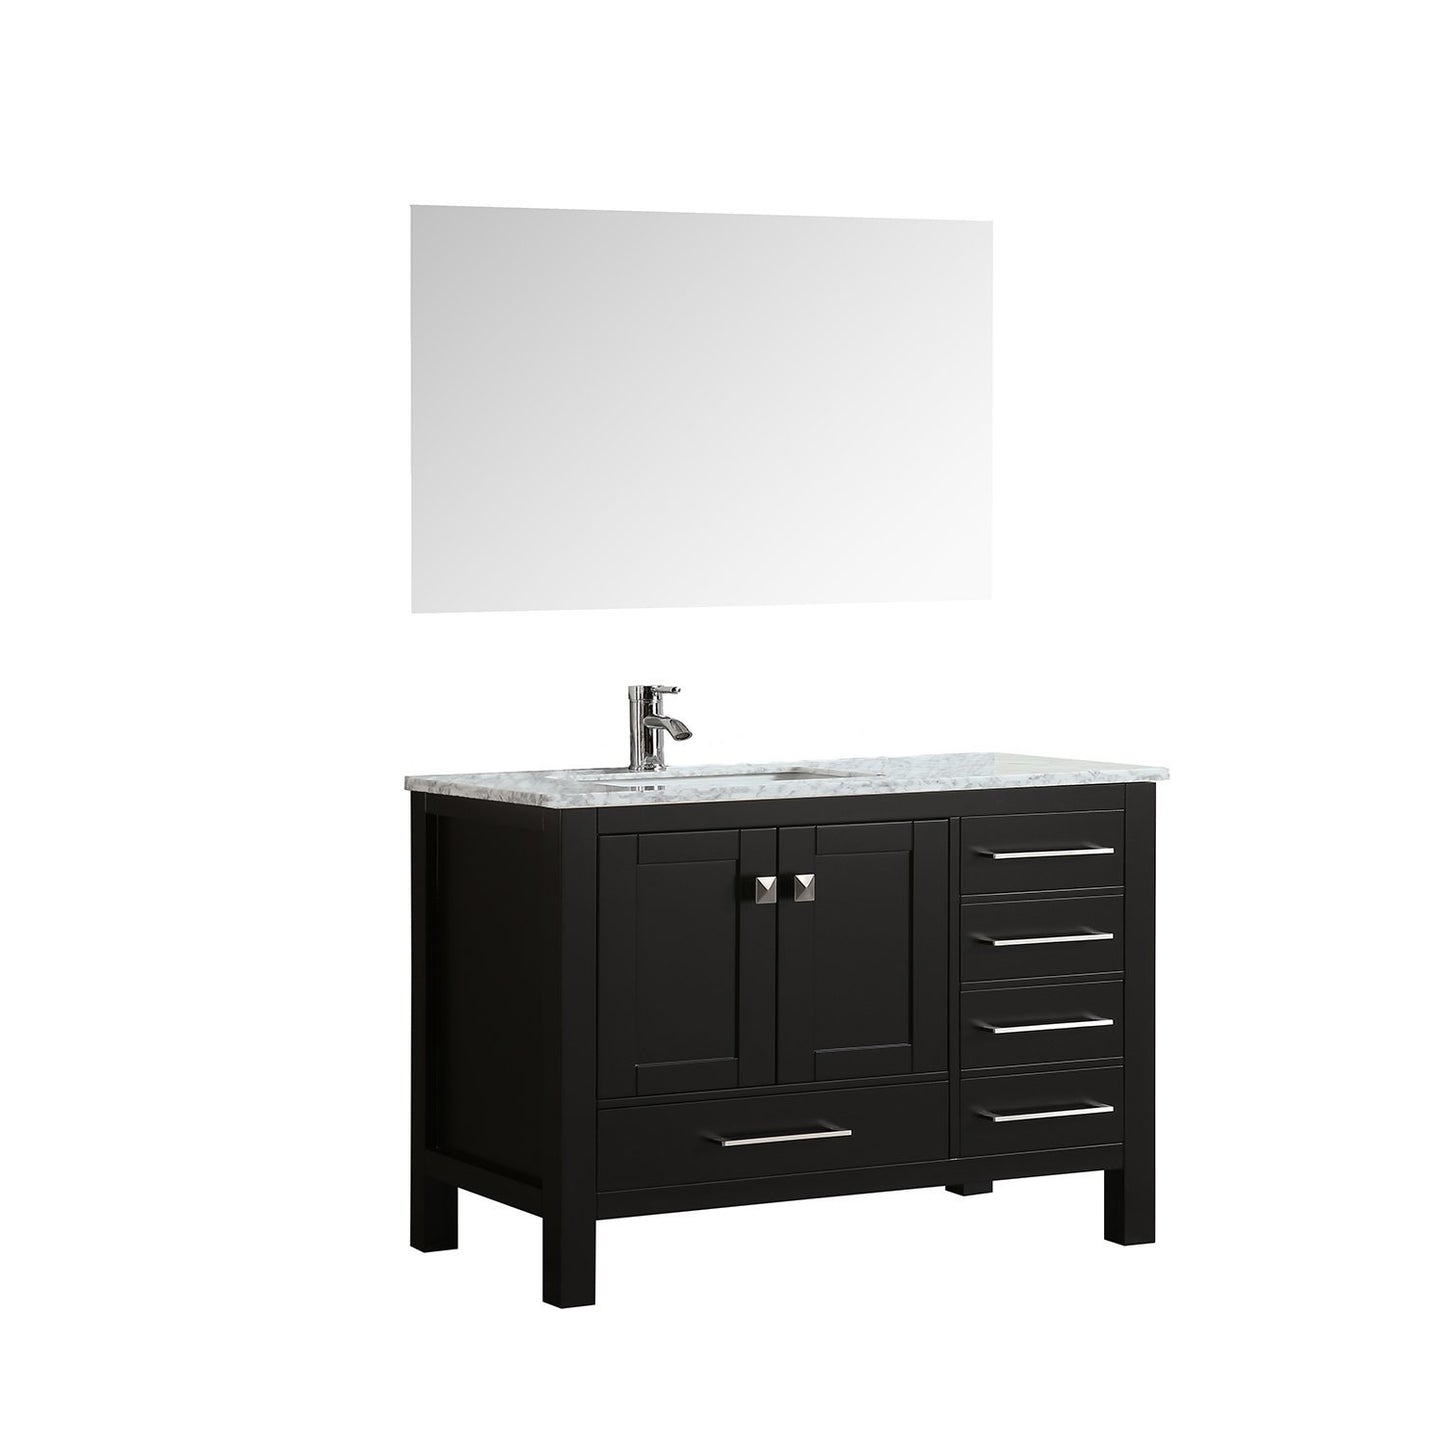 Eviva London 42 in. Transitional Espresso bathroom vanity with White Carrara Marble Countertop - Luxe Bathroom Vanities Luxury Bathroom Fixtures Bathroom Furniture